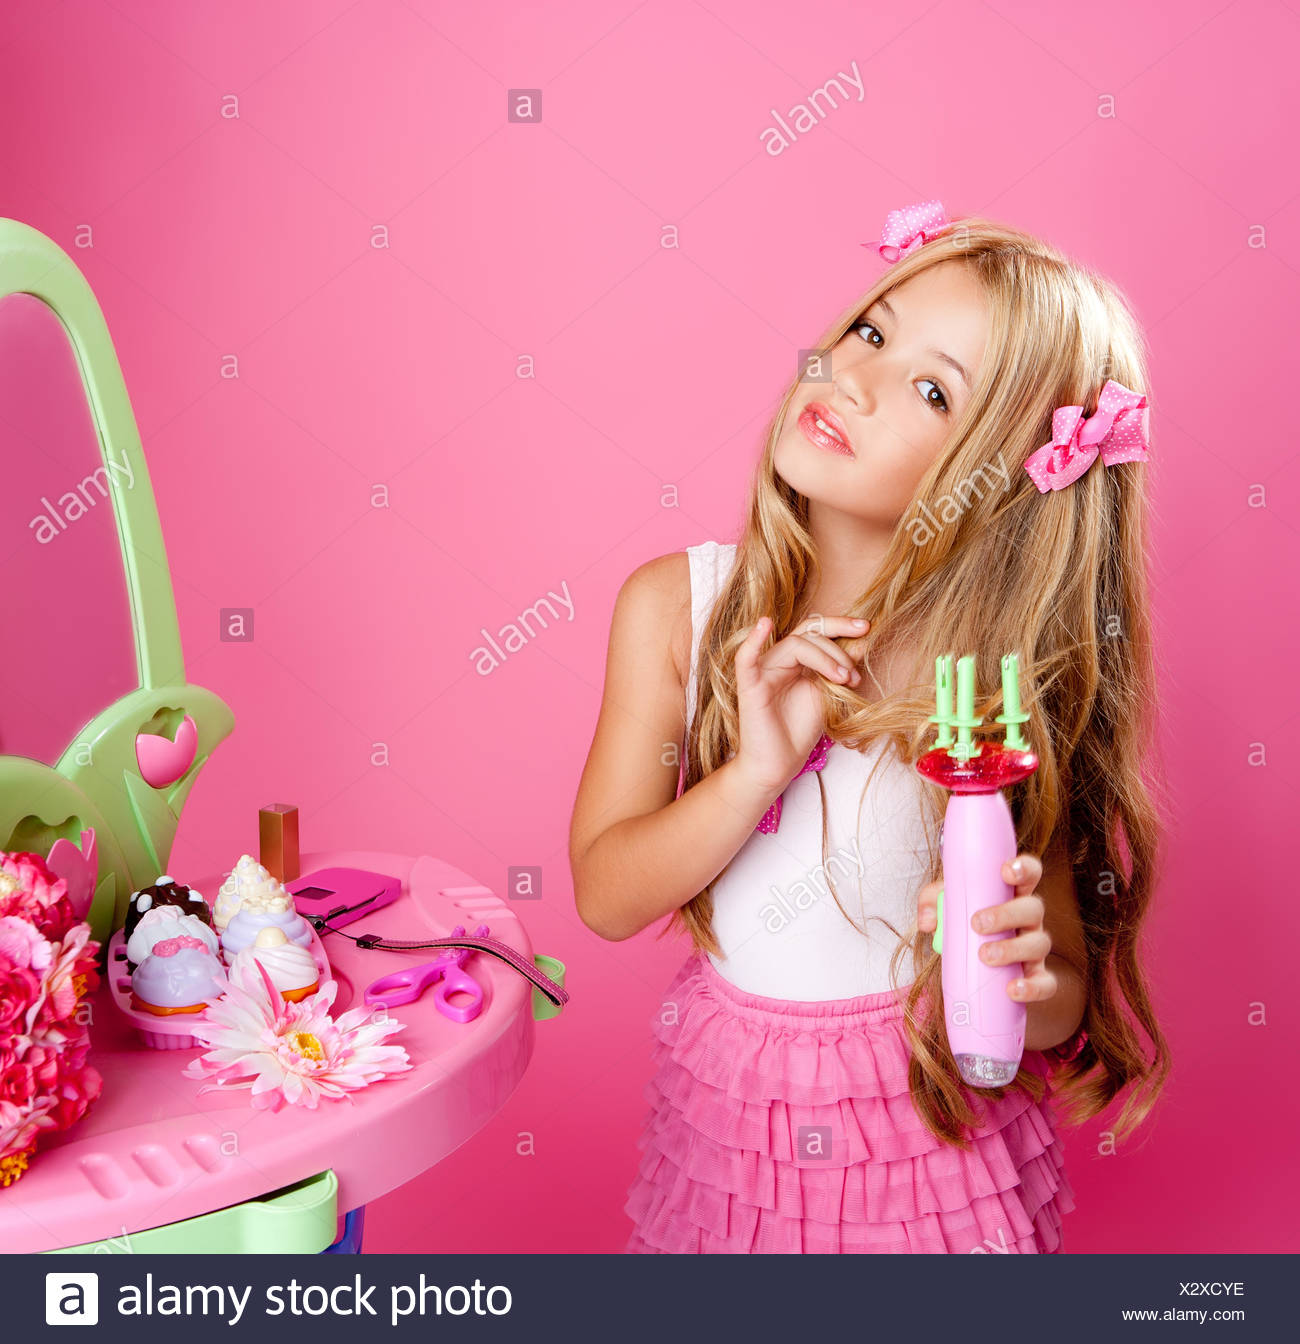 Hairdresser Blond Fashion Doll Girl With Hair Curler Stock Photo